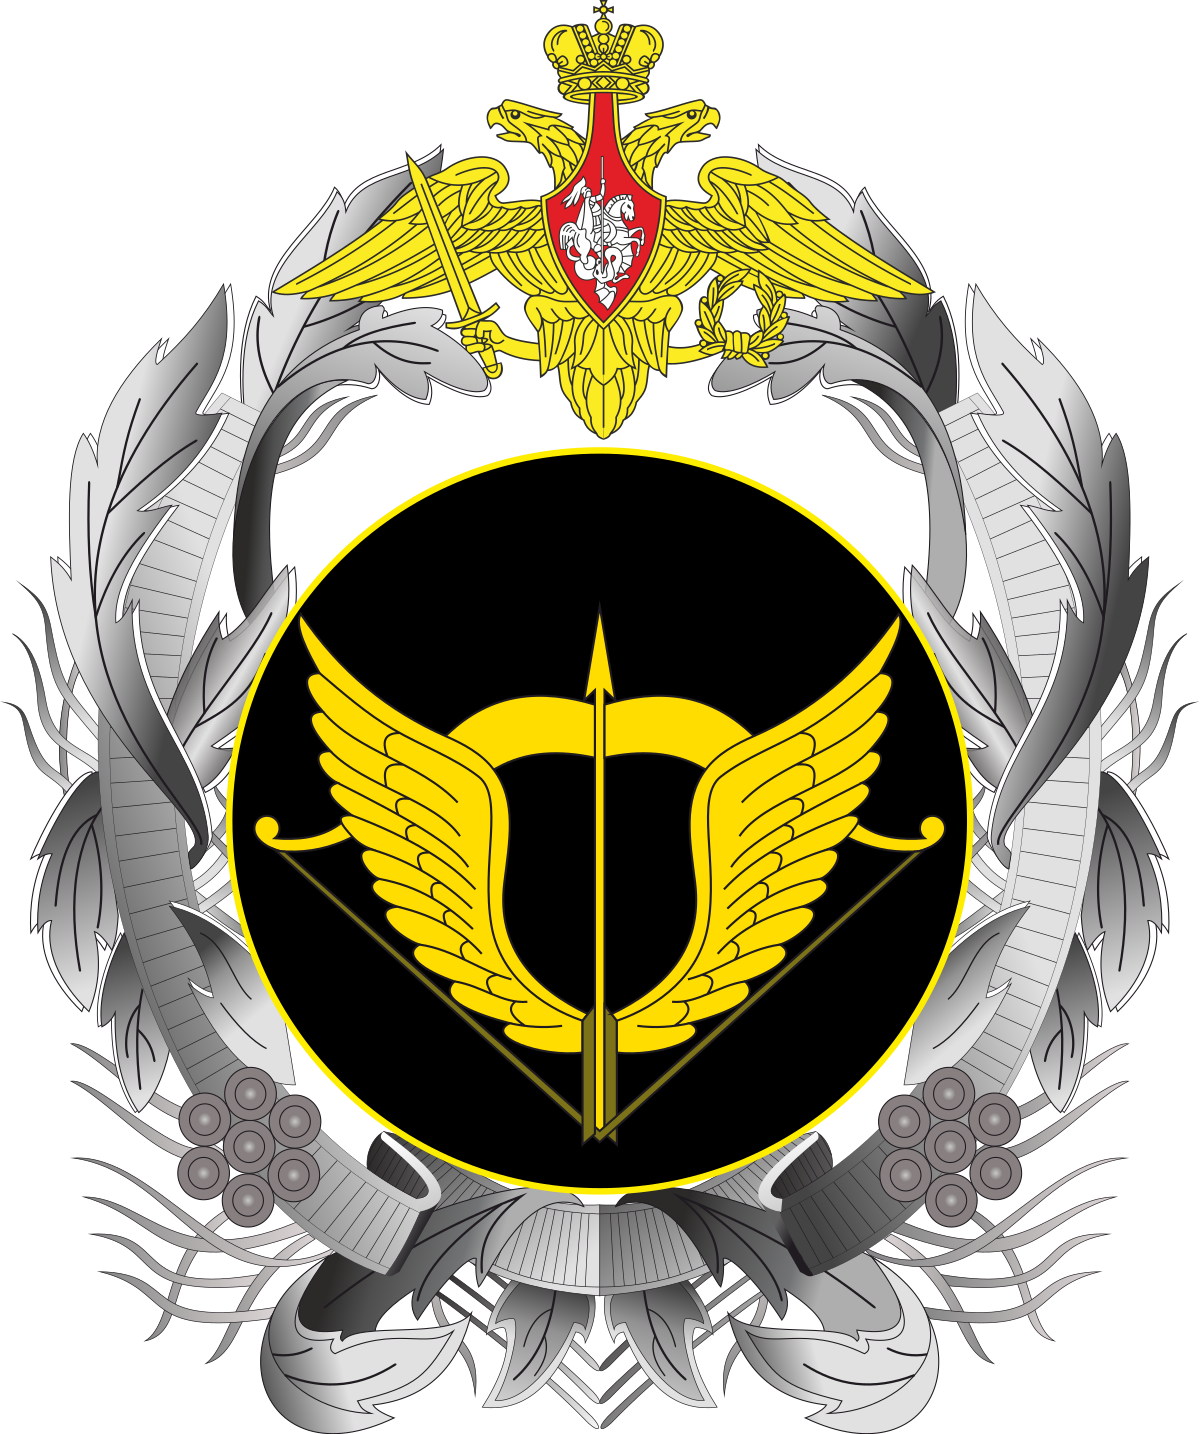 1200px-Great_emblem_of_the_Special_Operations_Forces.svg.png